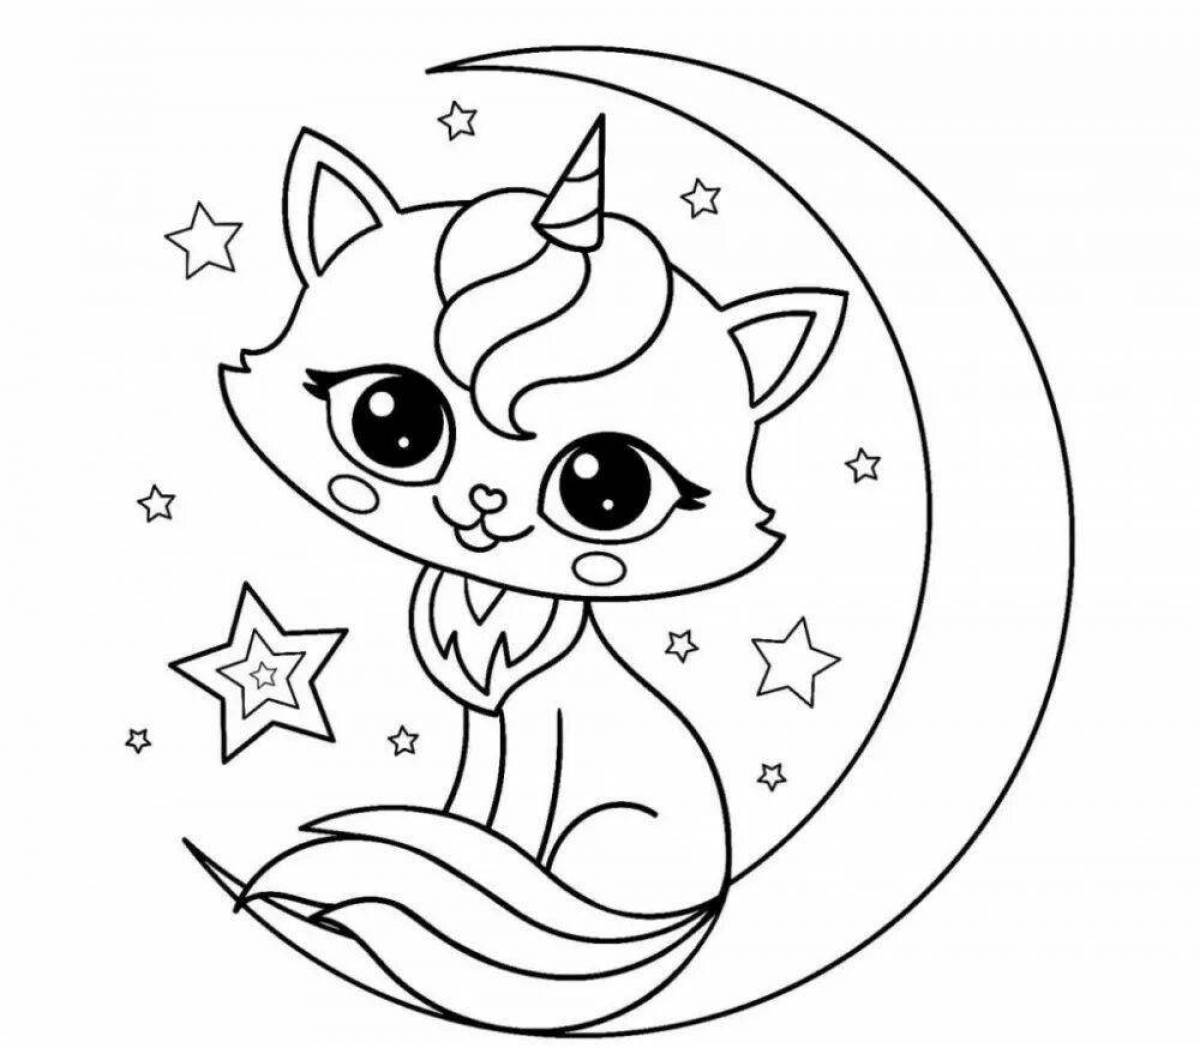 Exalted catunicorn coloring page